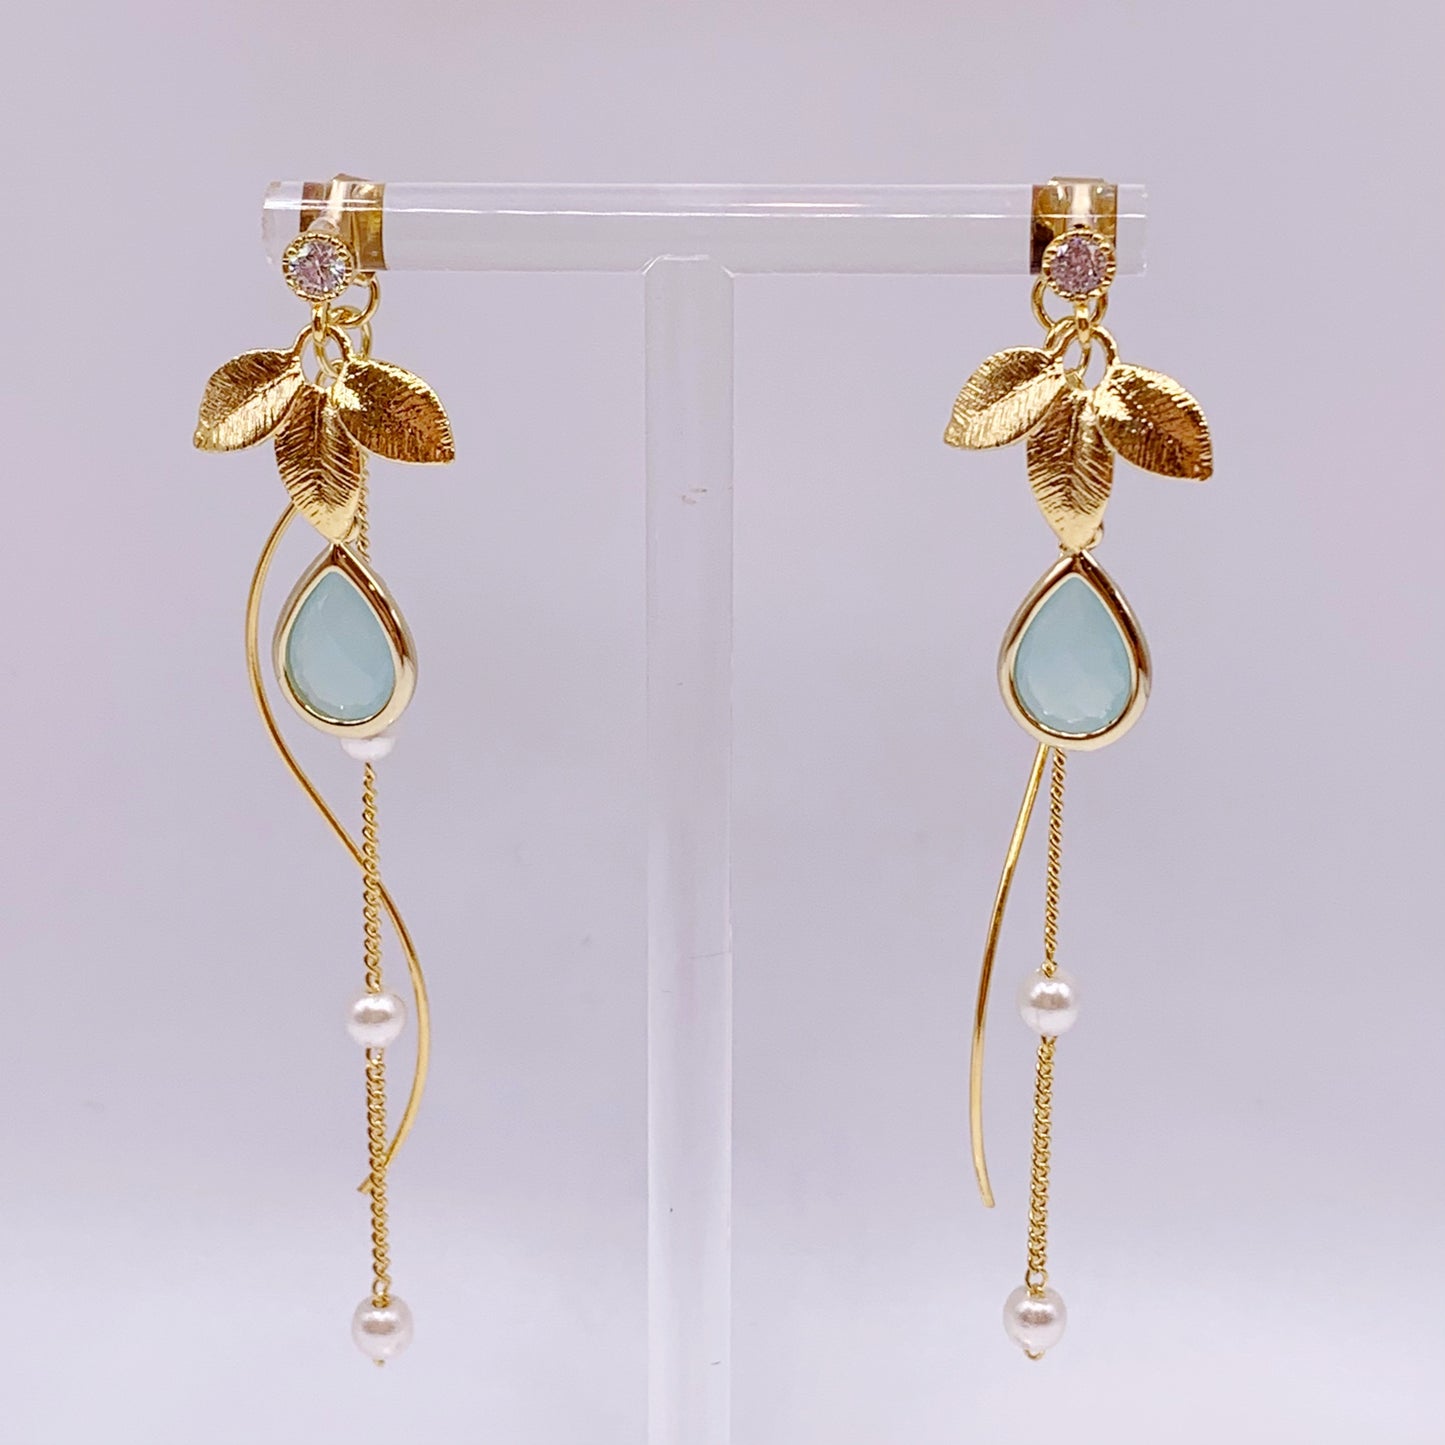 Golden leaf with Golden Chain and Pearl Dangling Earrings